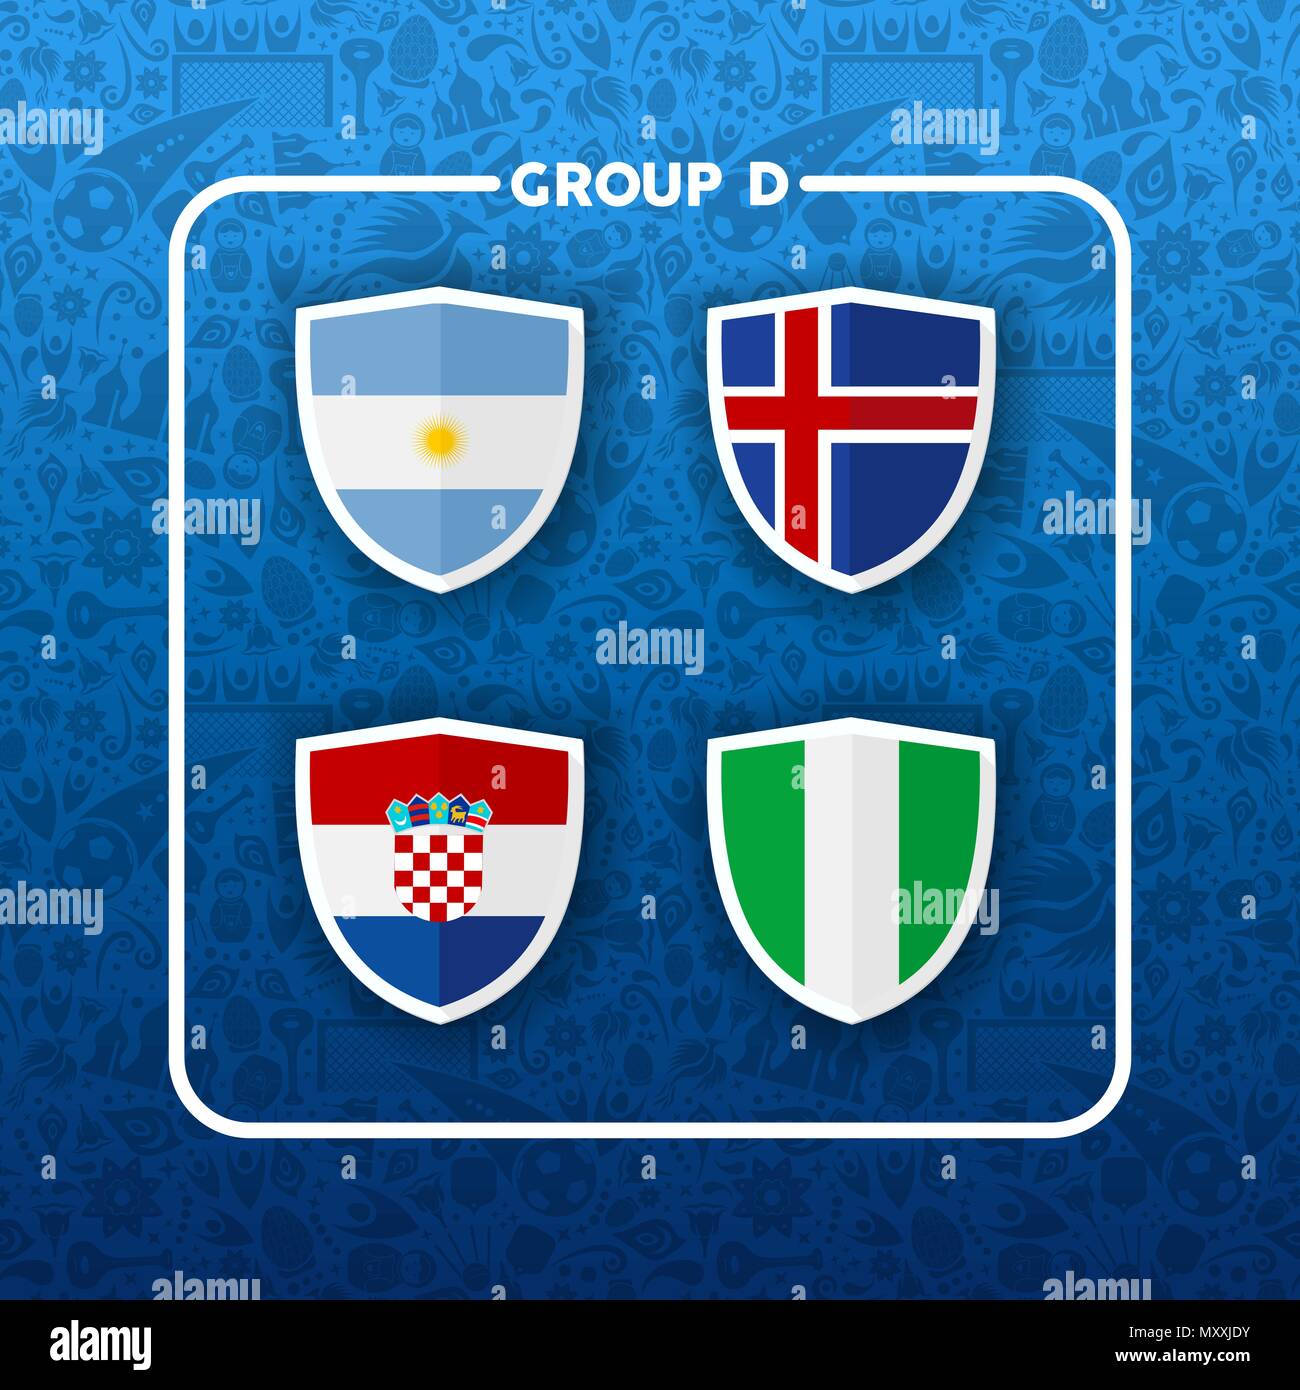 Soccer championship event schedule for 2018. Group D country team list of football match games. Includes Argentina, Iceland, Croatia and Nigeria. EPS1 Stock Vector